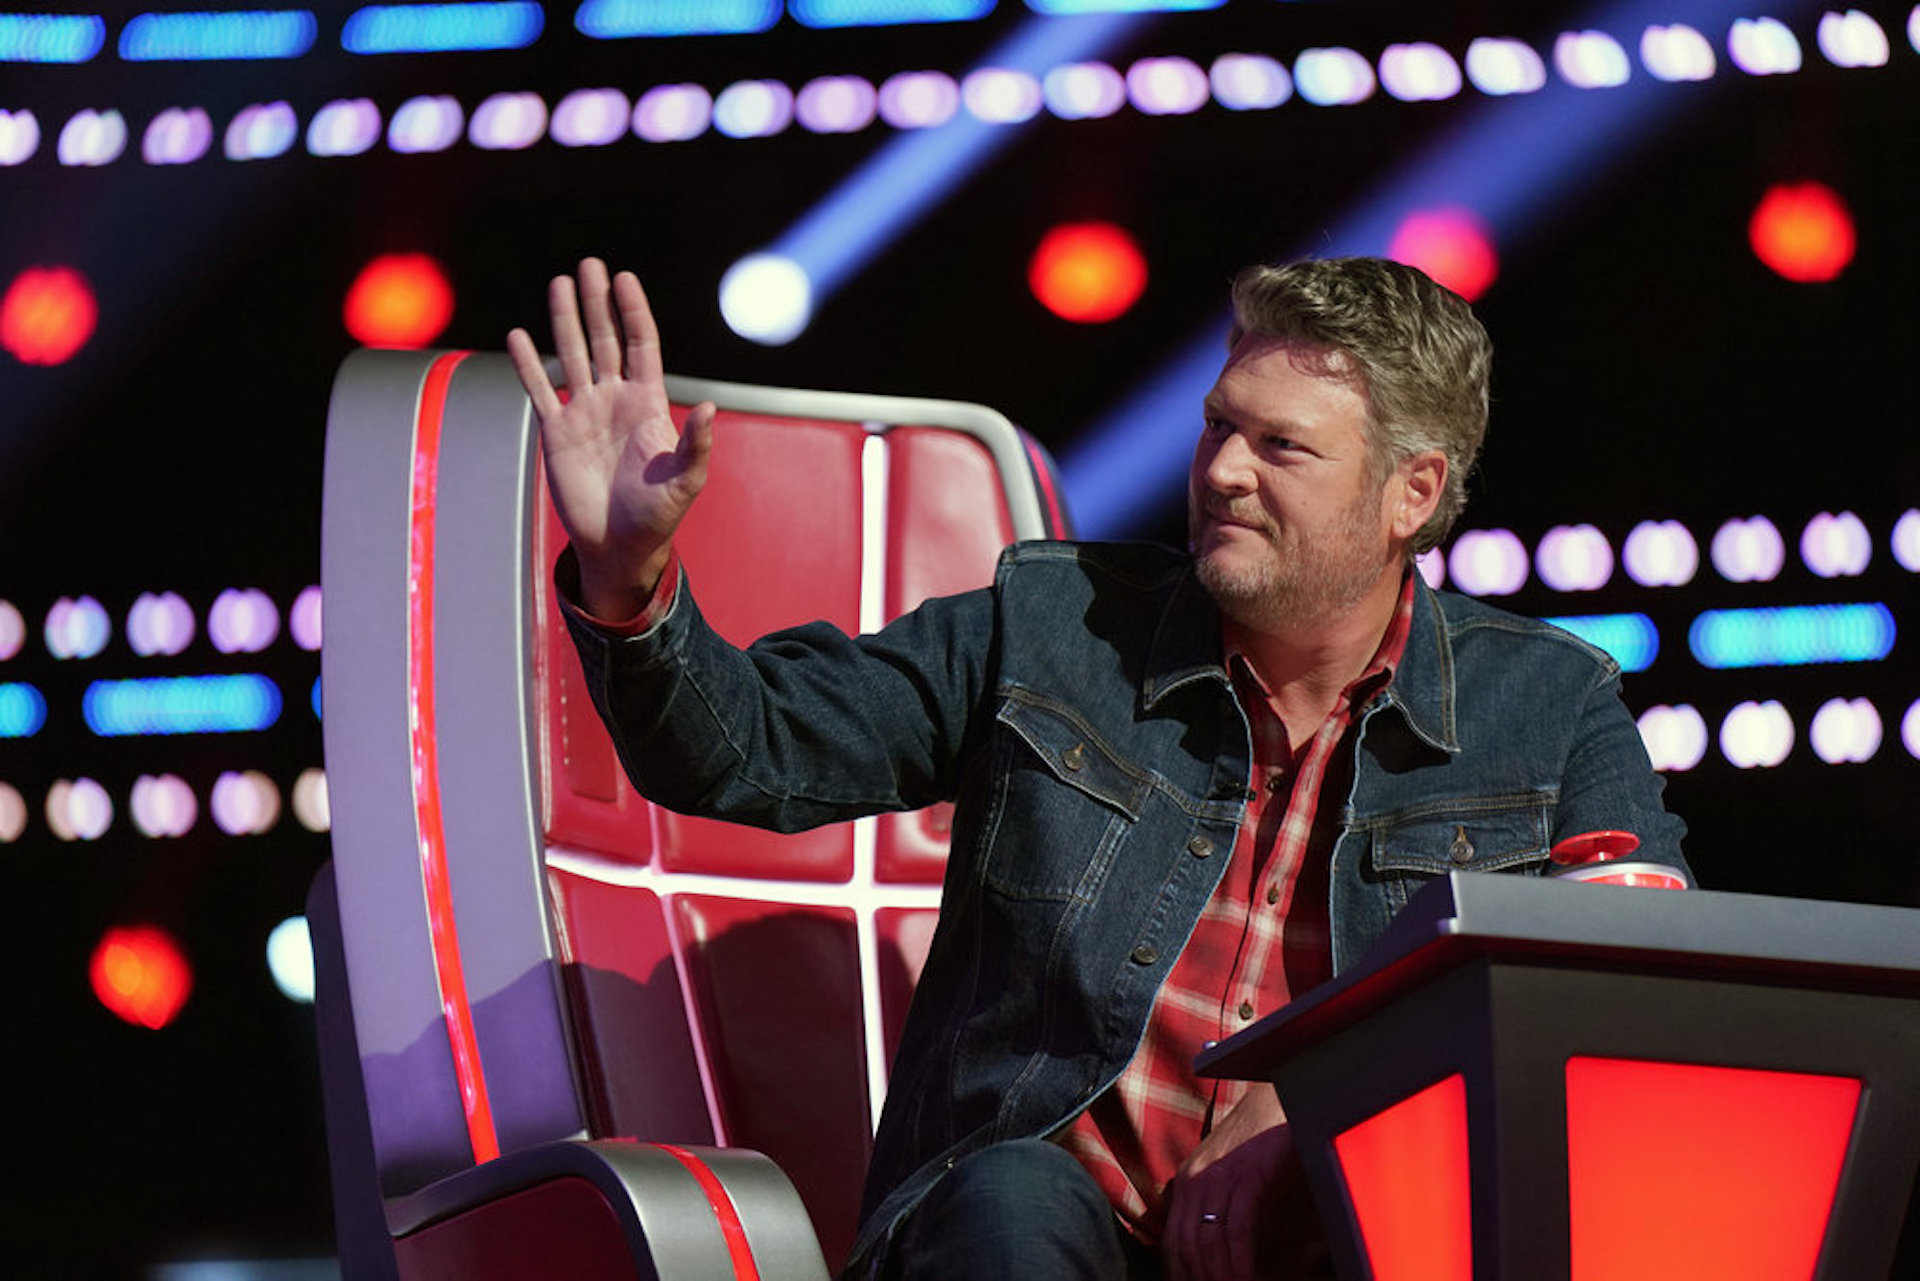 NBC announced that the next season of The Voice would be Blake Shelton's last.